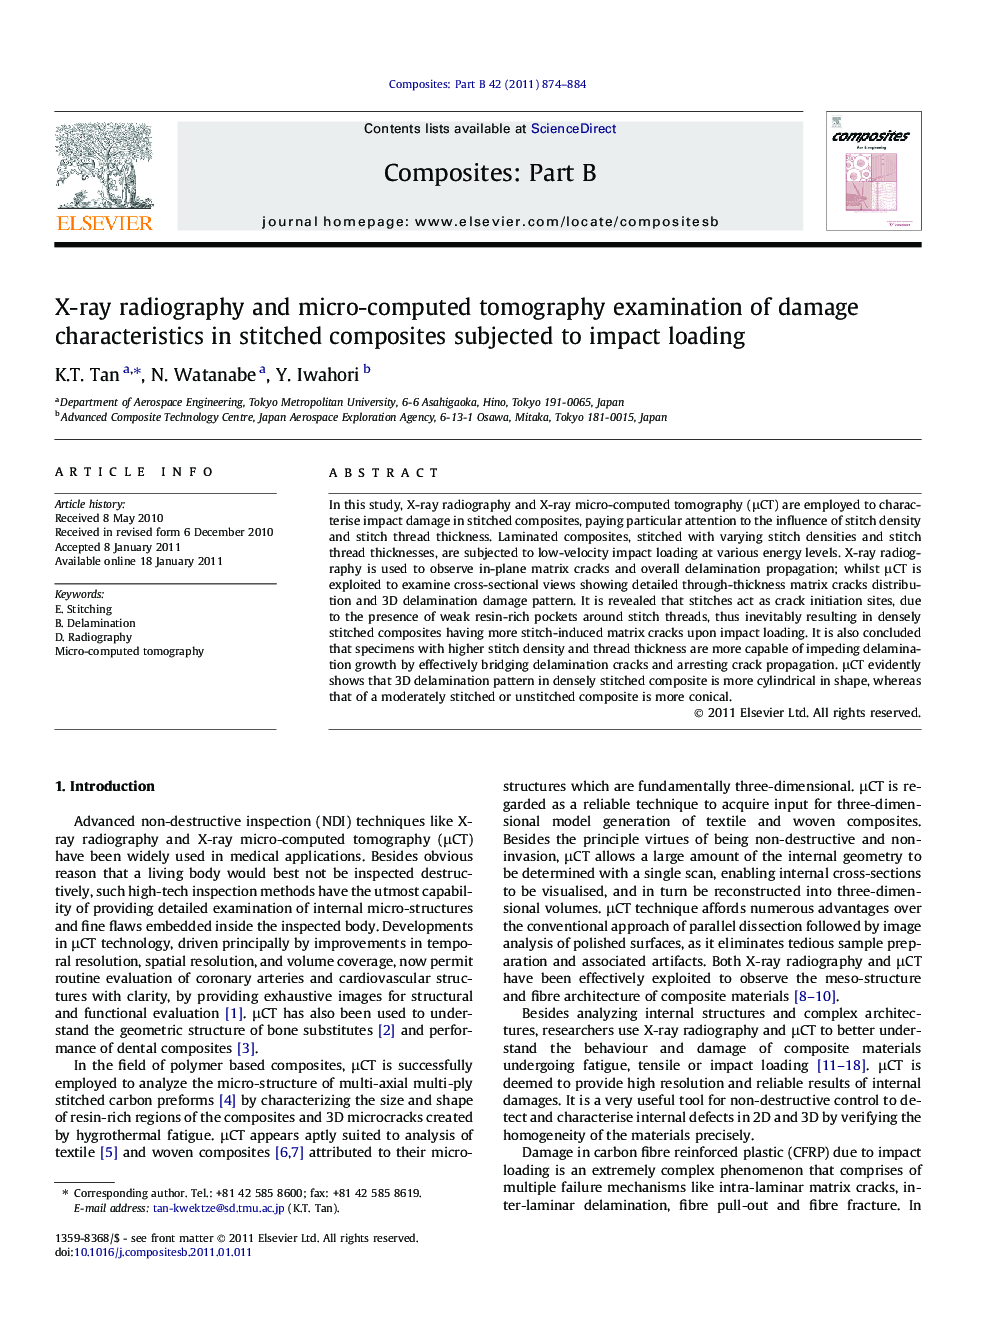 X-ray radiography and micro-computed tomography examination of damage characteristics in stitched composites subjected to impact loading